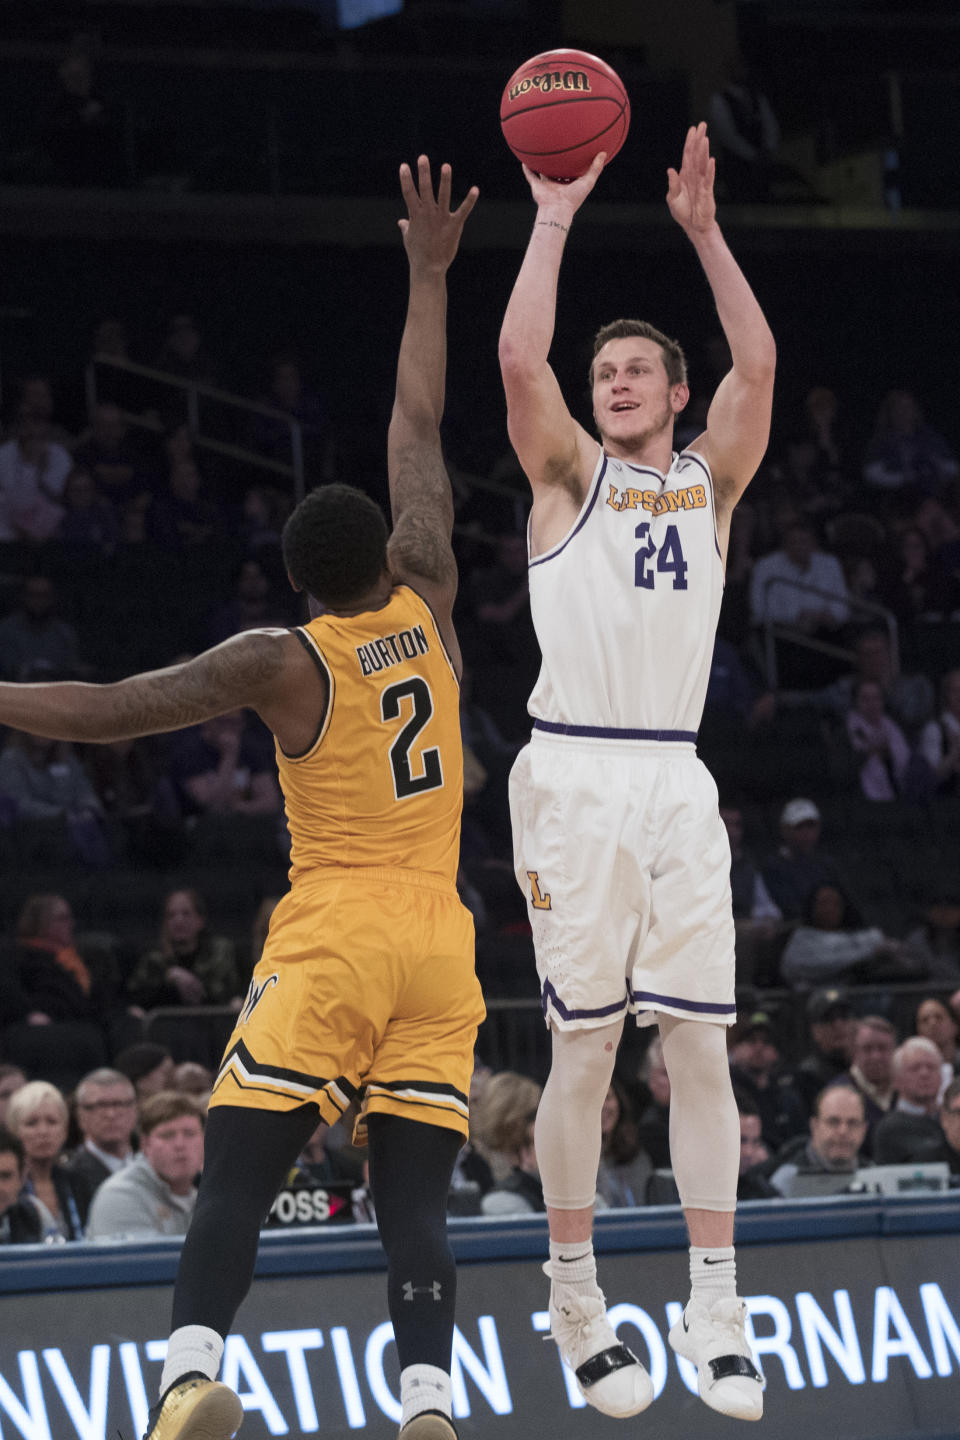 Lipscomb guard Garrison Mathews (24) shoots a 3-point goal past Wichita State guard Jamarius Burton (2) during the first half of a semifinal college basketball game in the National Invitational Tournament, Tuesday, April 2, 2019, at Madison Square Garden in New York. (AP Photo/Mary Altaffer)